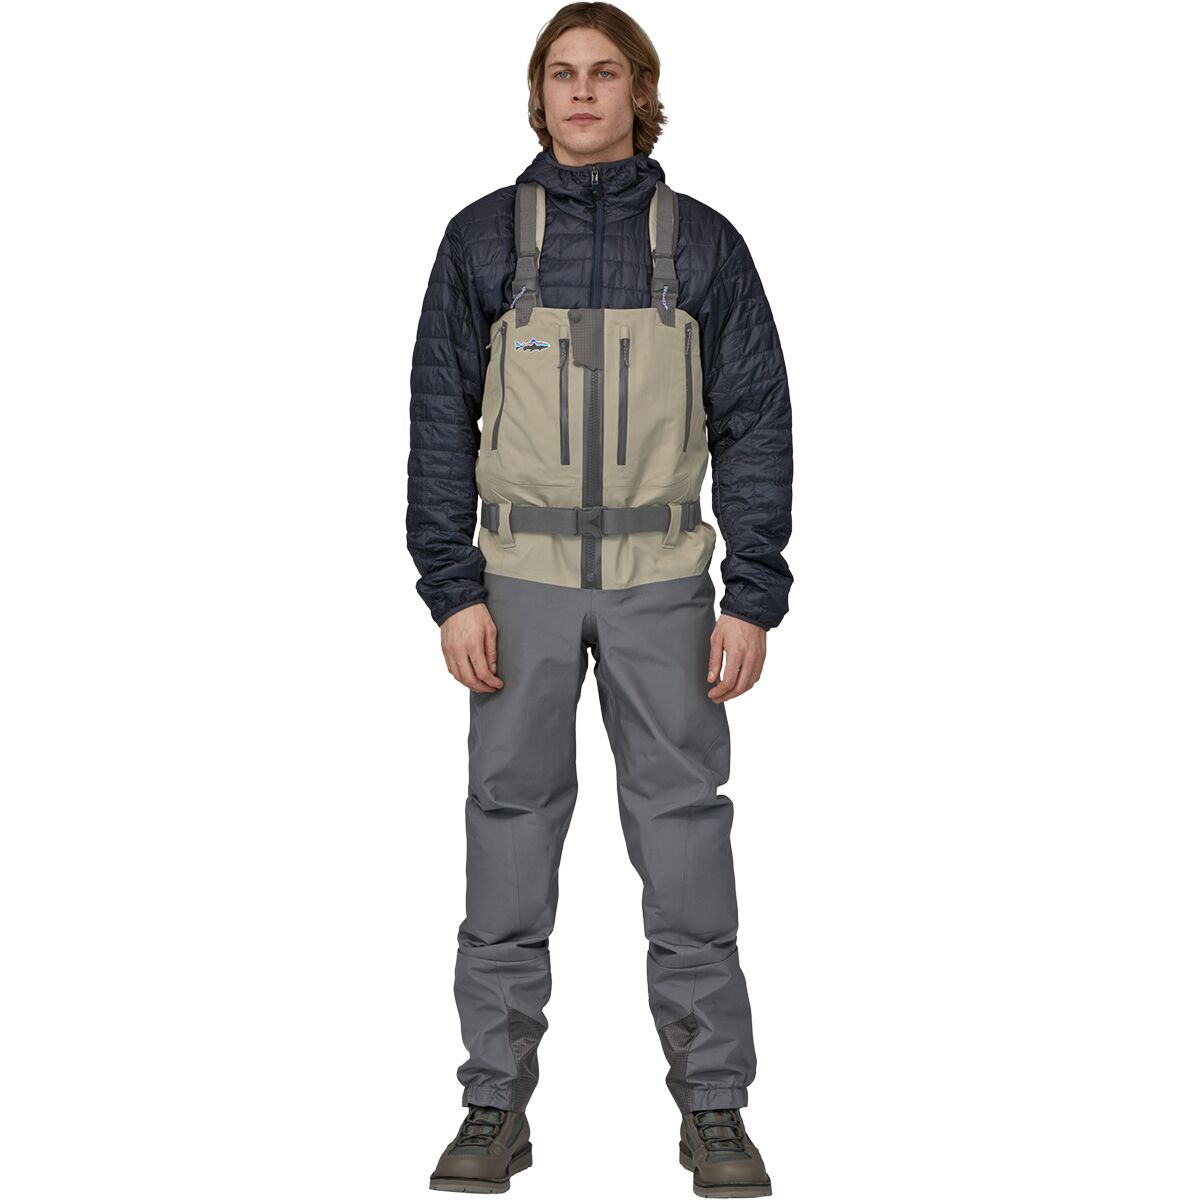 Patagonia Swiftcurrent Expedition Zip-front Waders - Men's